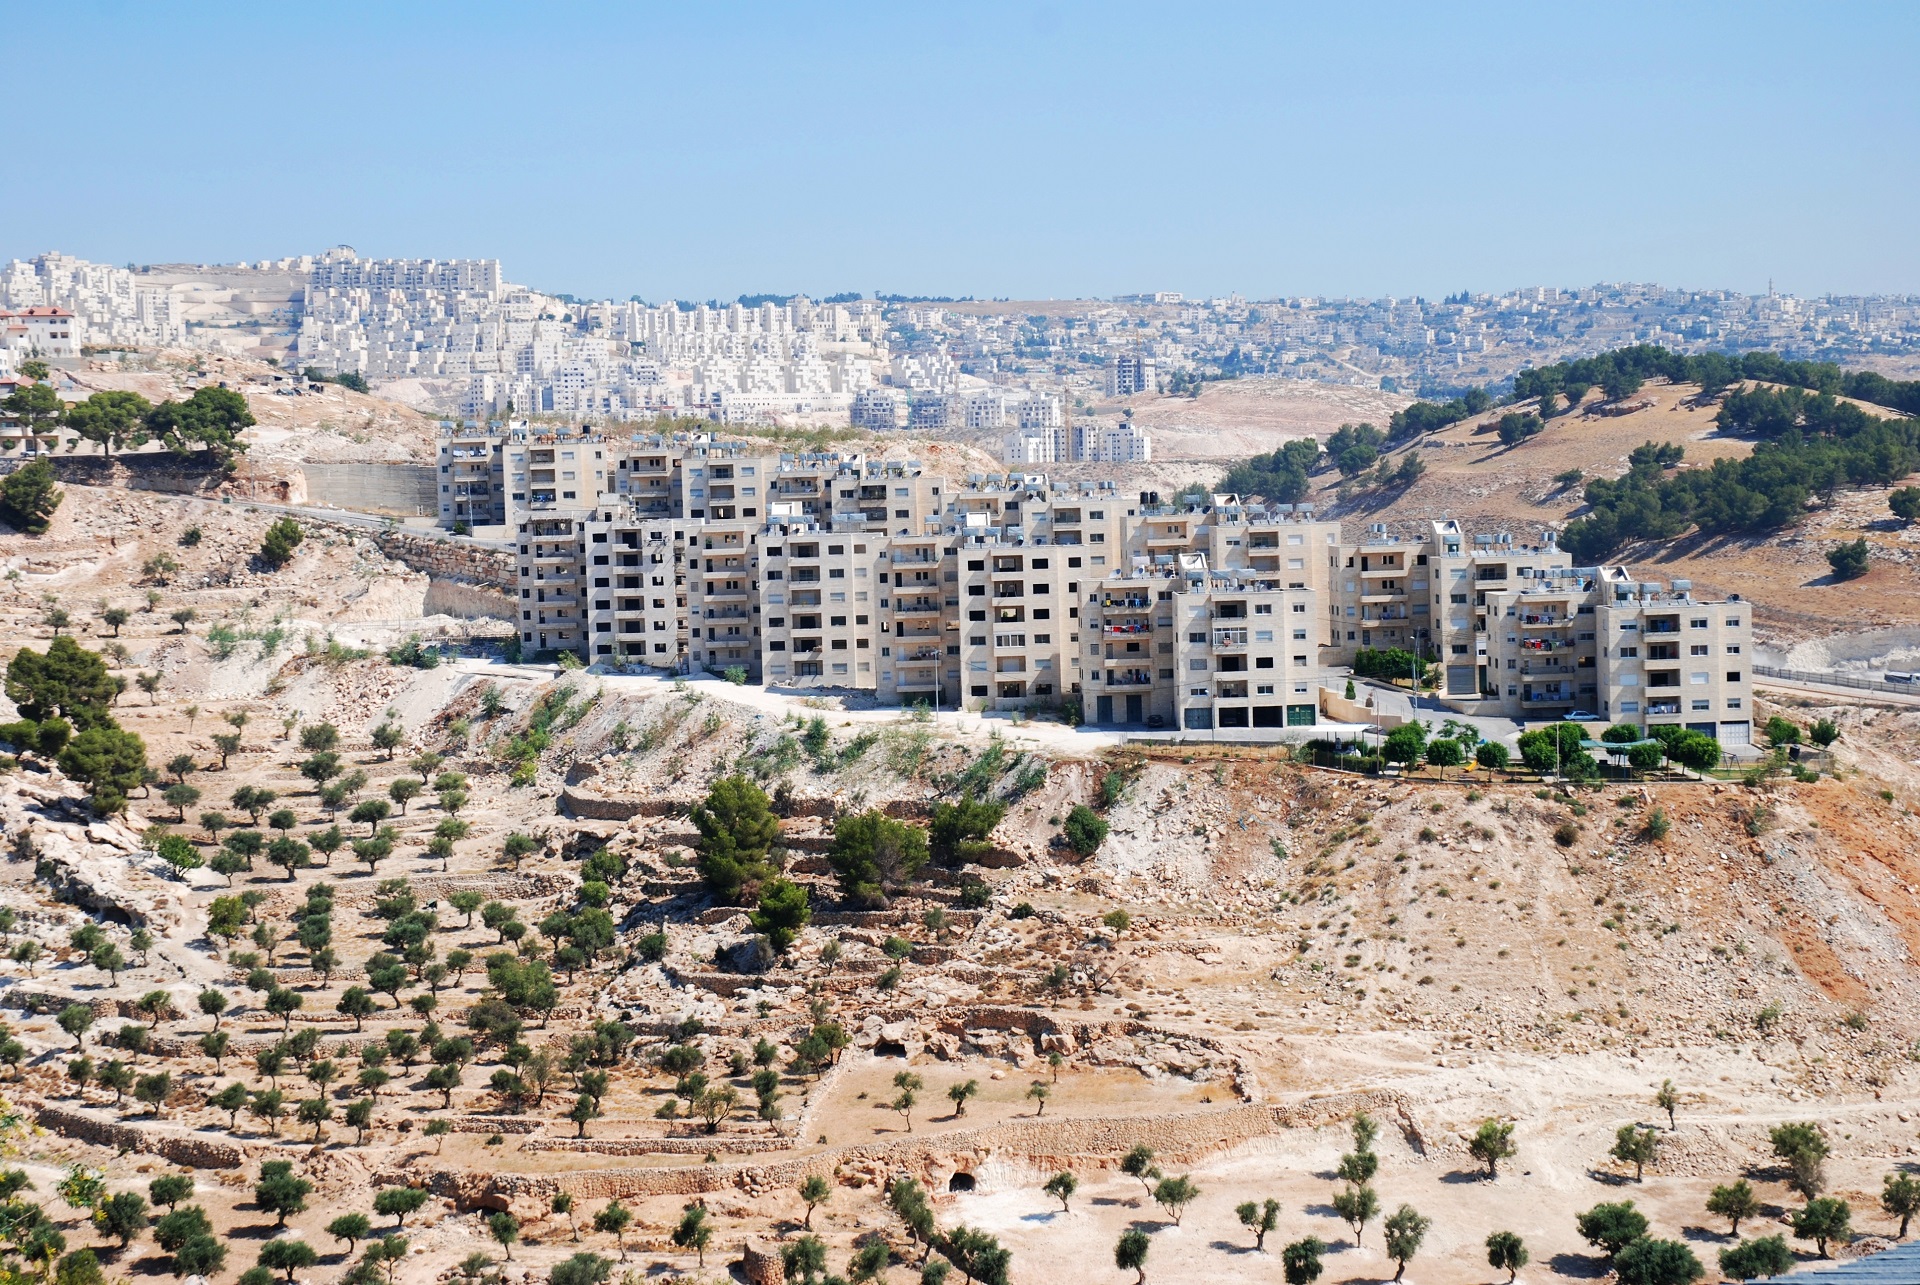 New housing estate in West Bank